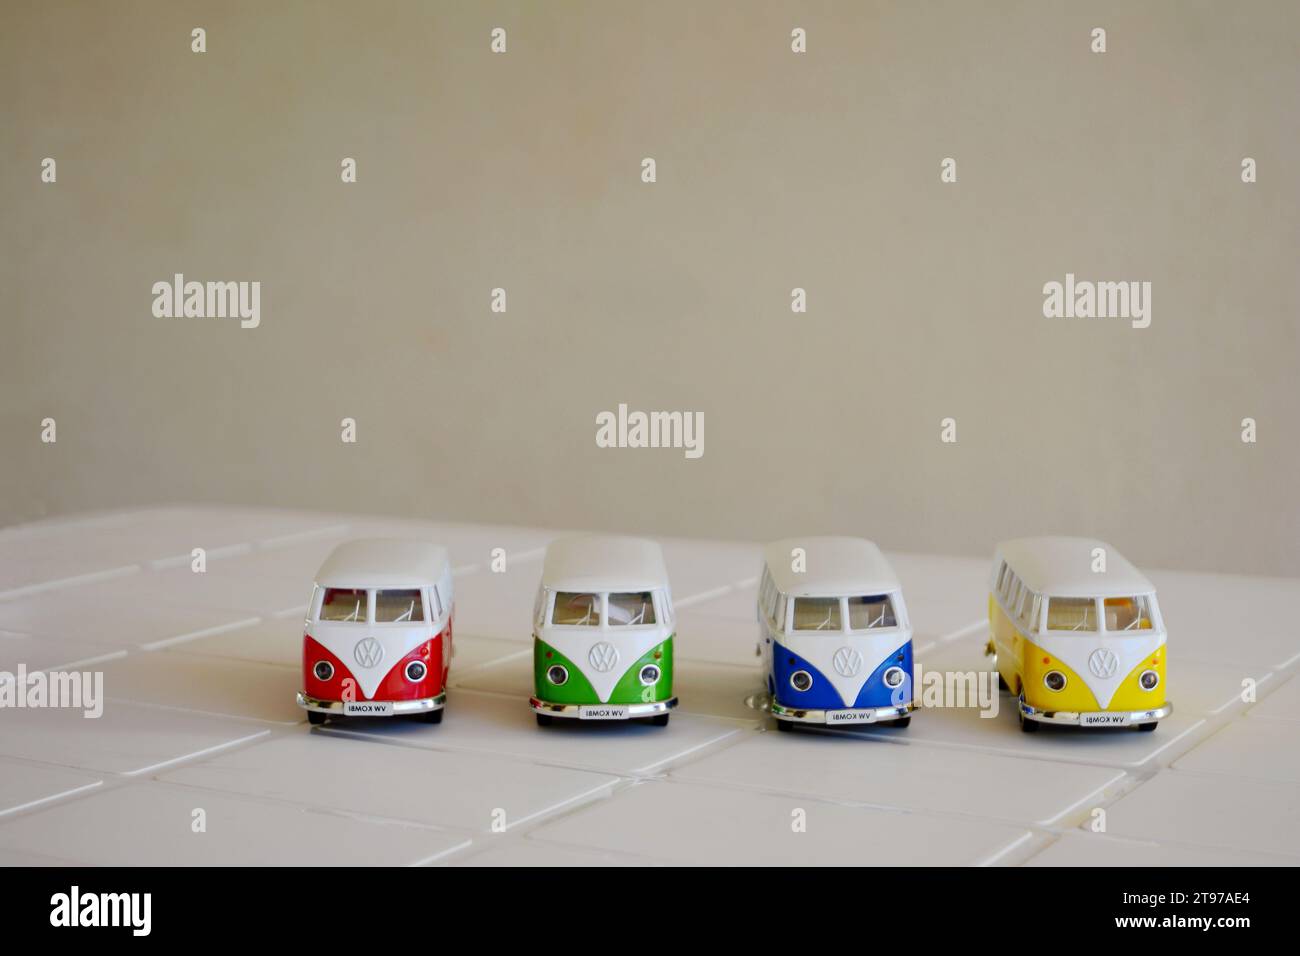 Van. Diecast, Iron miniature of vans of various colors, Brazil, South America, front view, selective focus on white table on white background Stock Photo